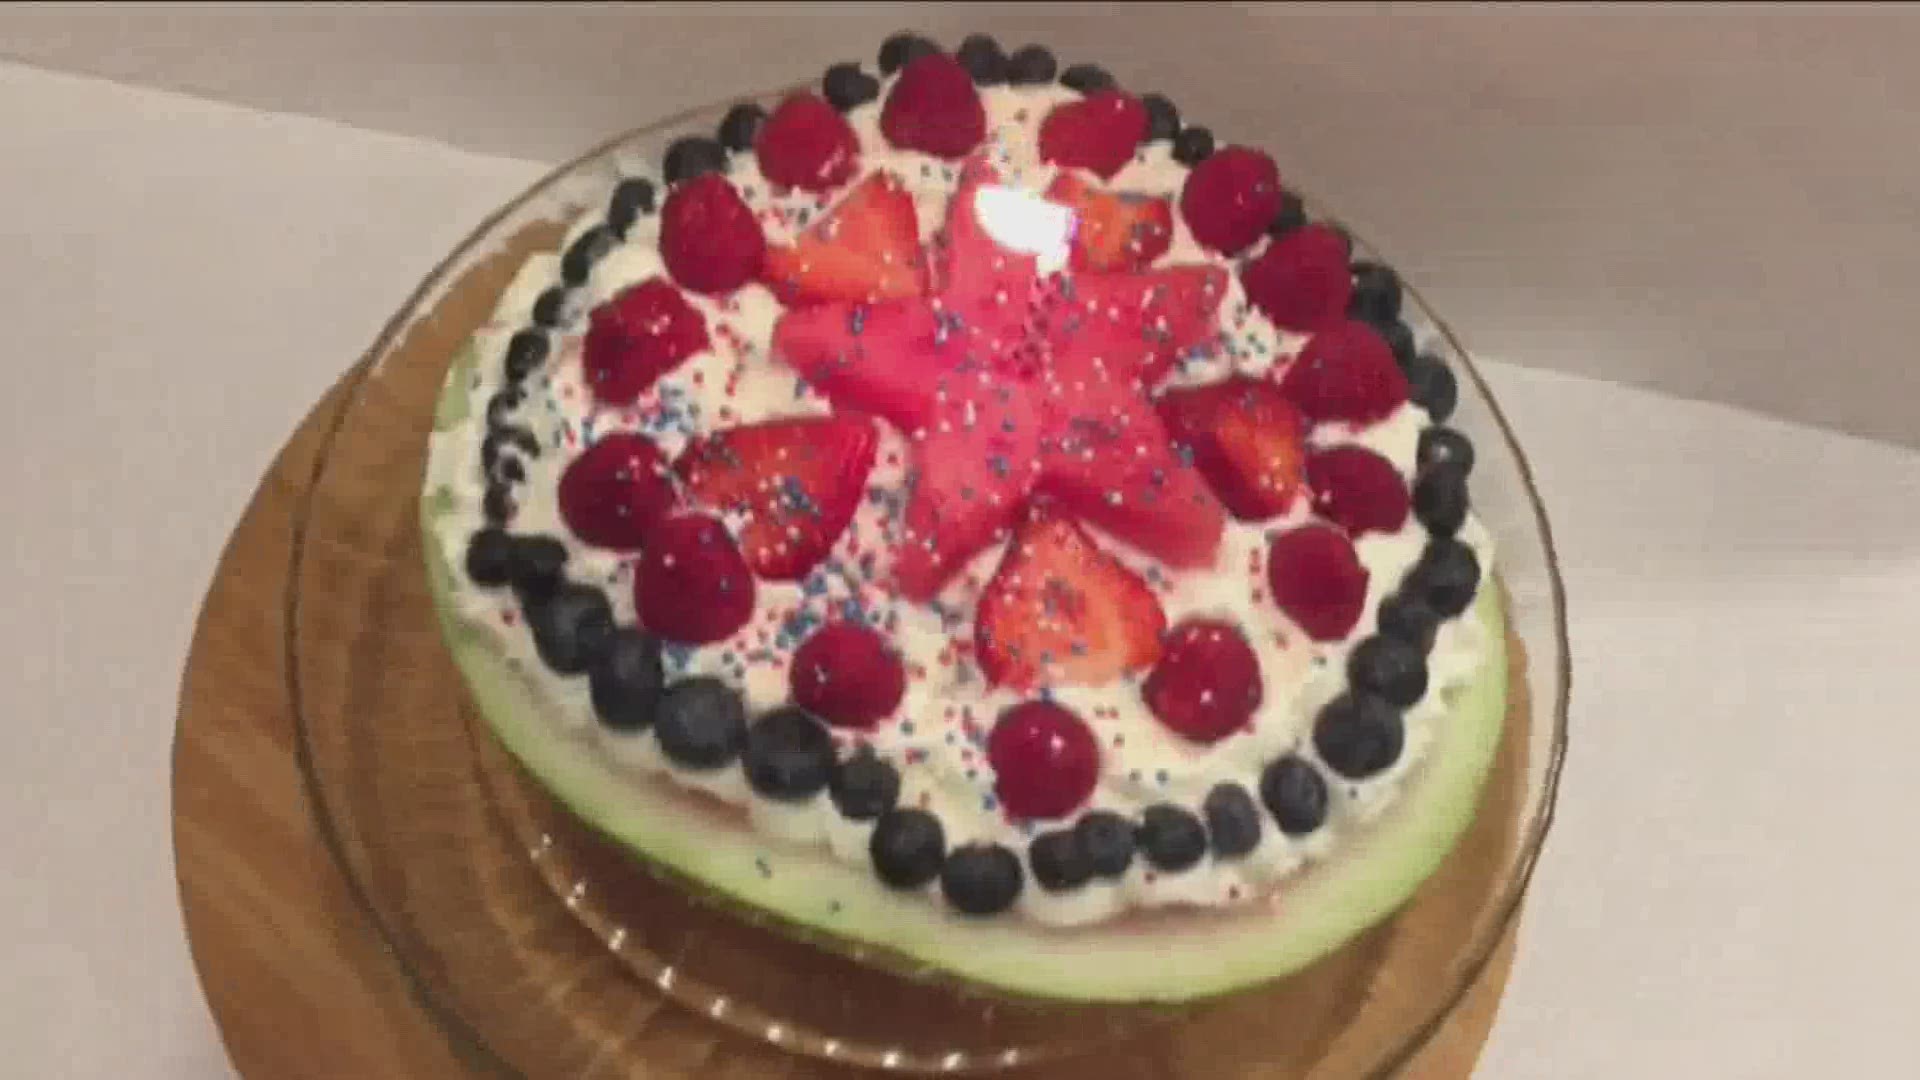 Chef Char's Independence Day dessert recipe